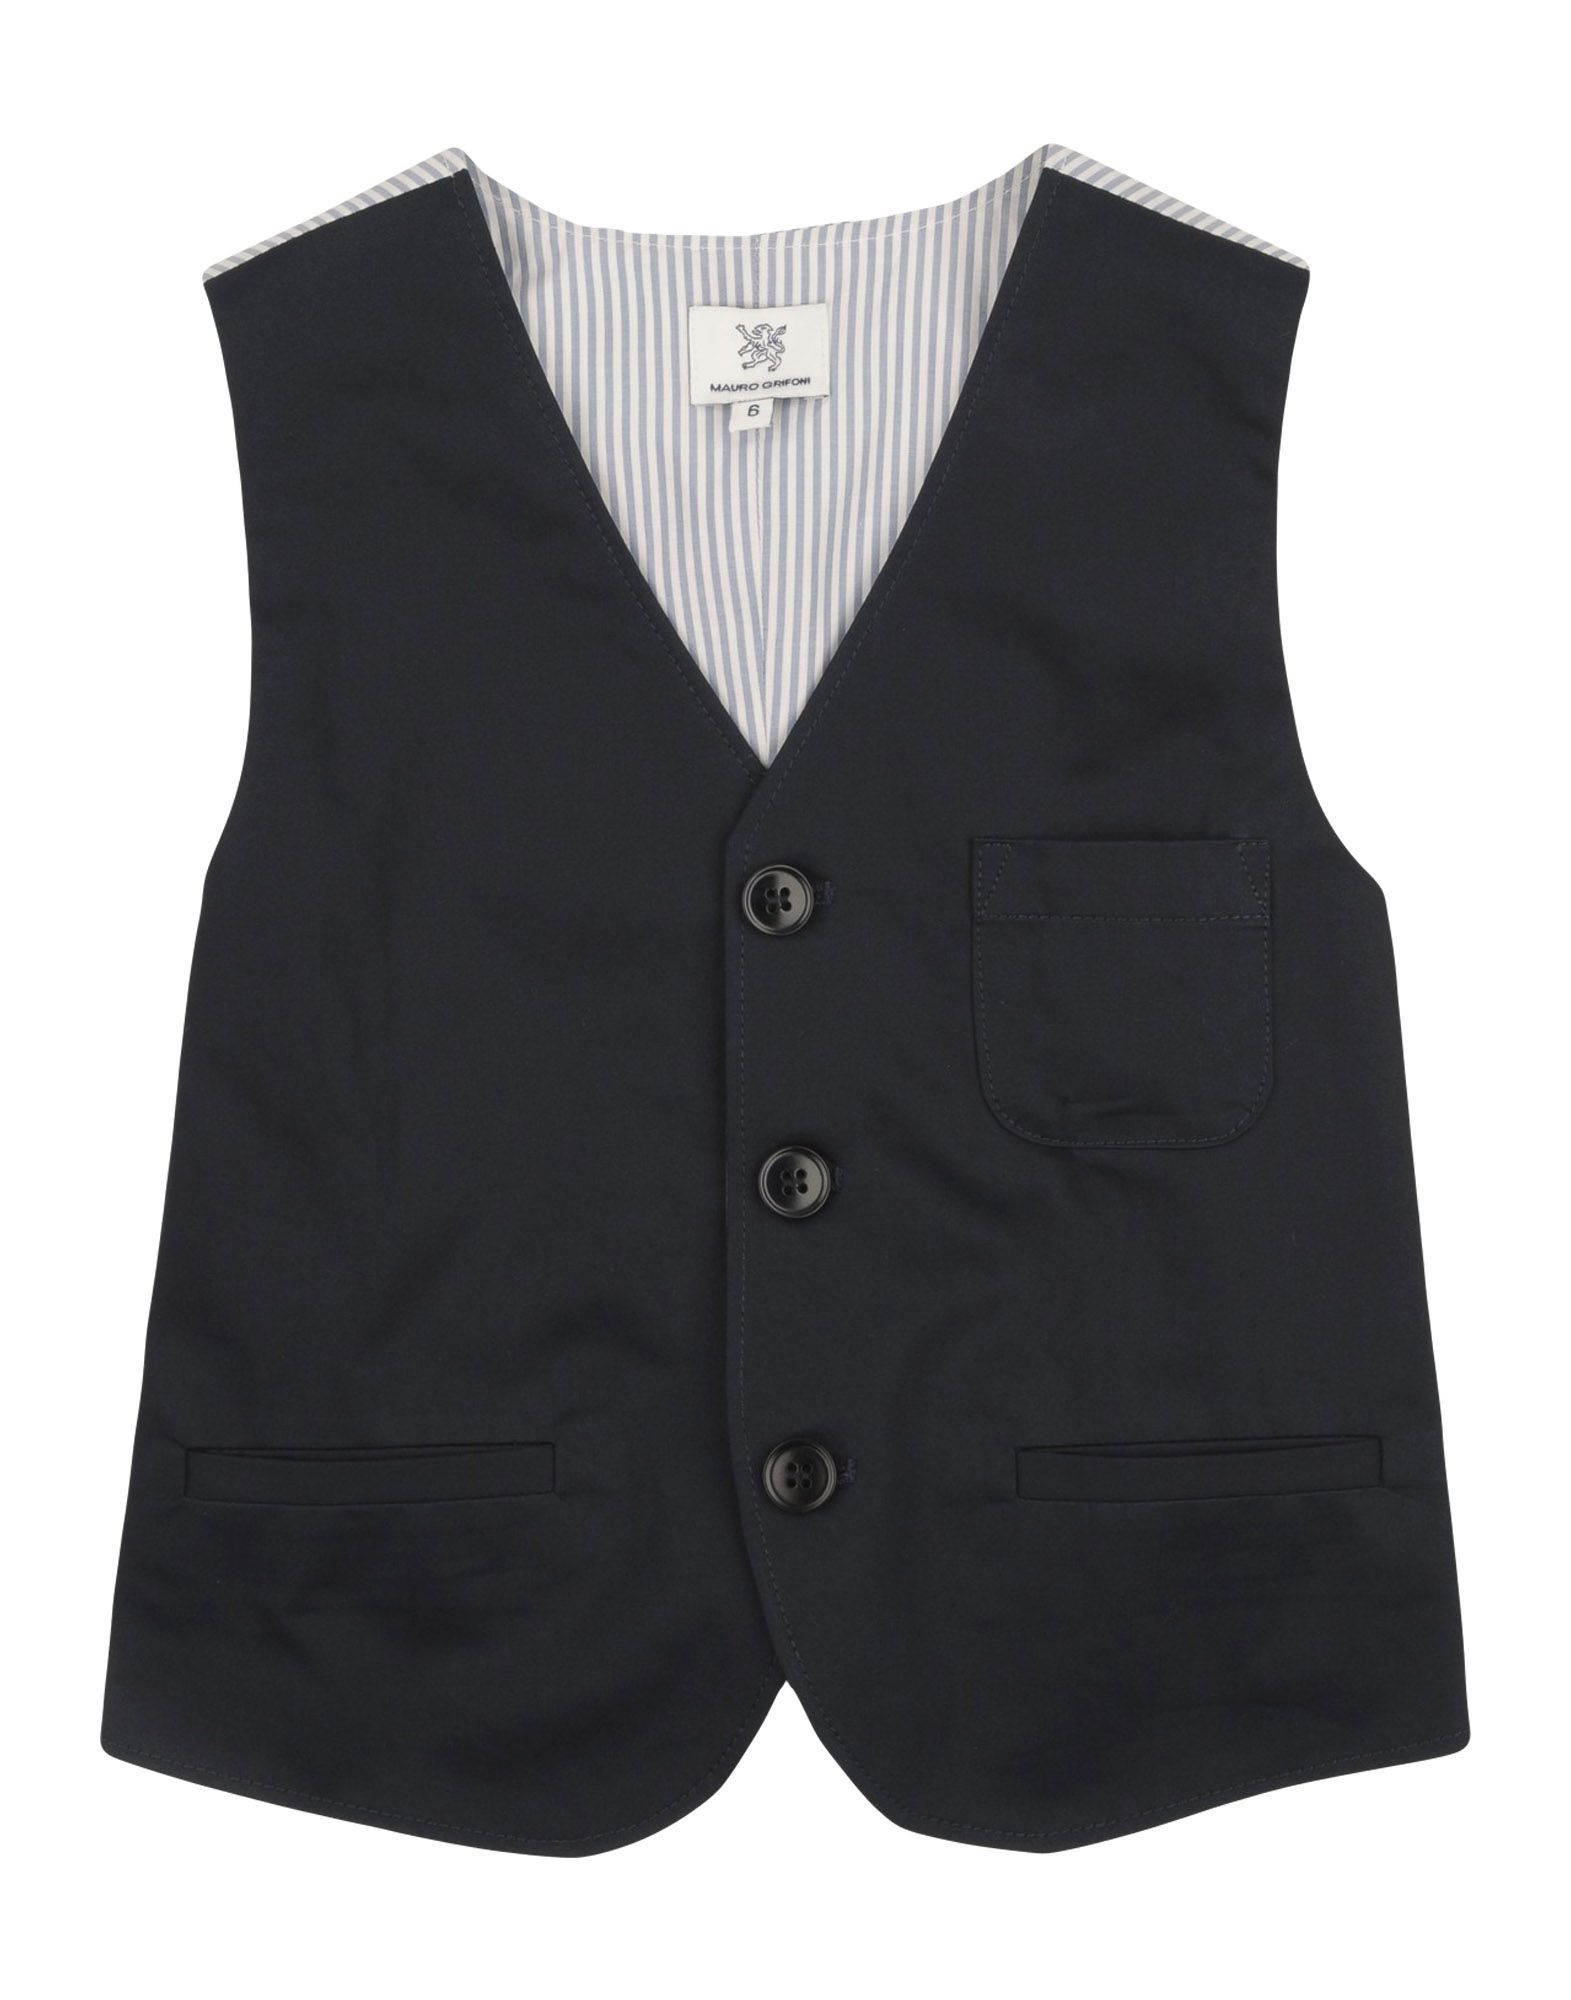 plain weave, no appliqu�s, solid colour, multipockets, button closing, v-neckline, single-breasted , sleeveless, lined interior, wash at 30� c, dry cleanable, iron at 110� c max, do not bleach, do not tumble dry, button closing waistcoat with belt